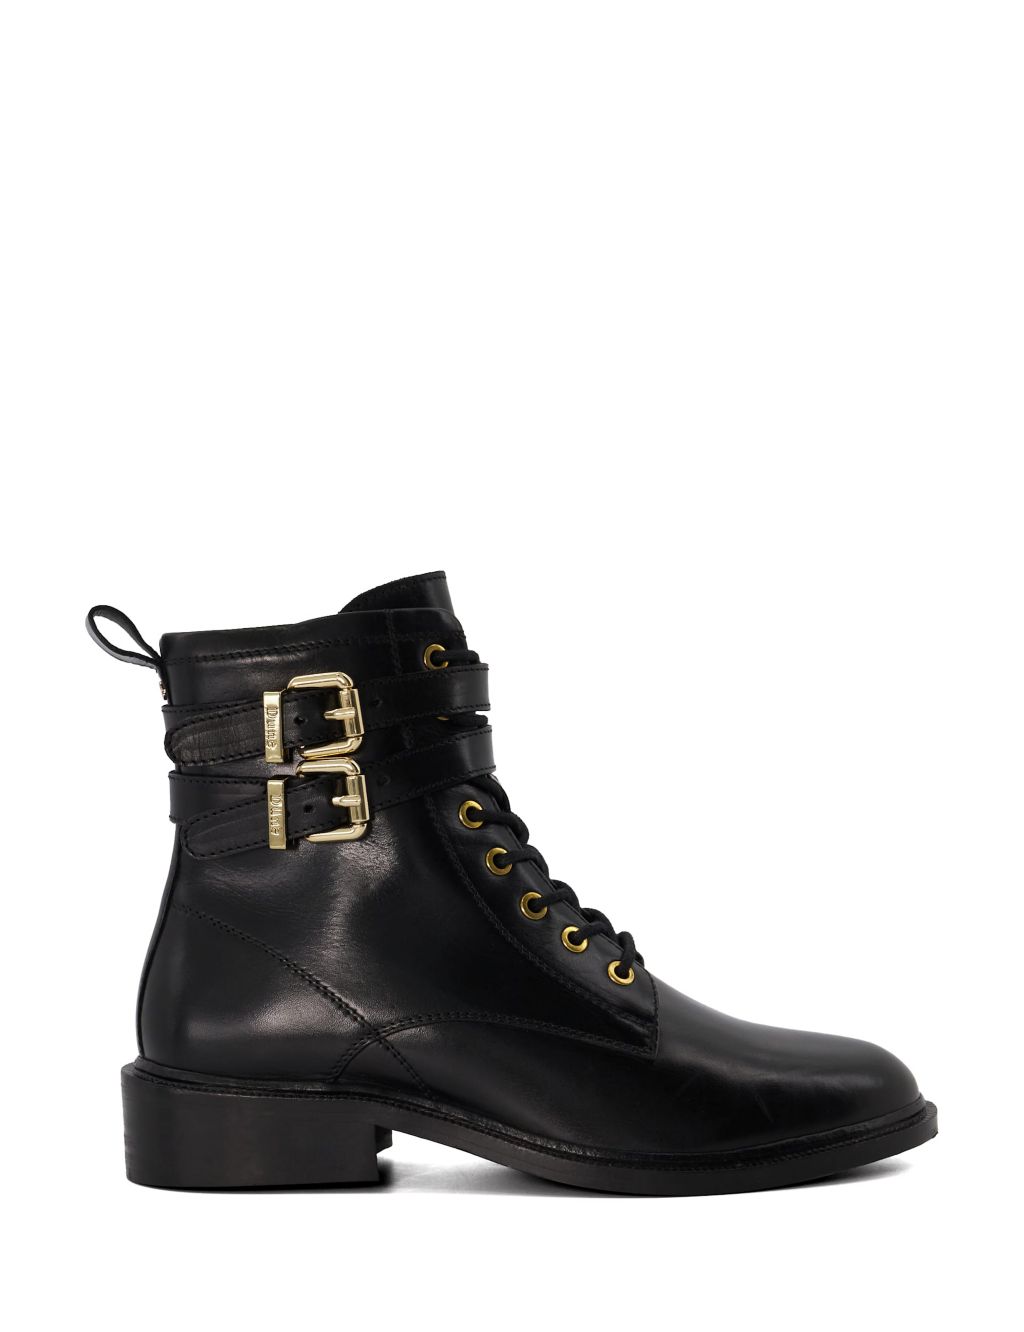 Leather Lace Up Buckle Flat Ankle Boots